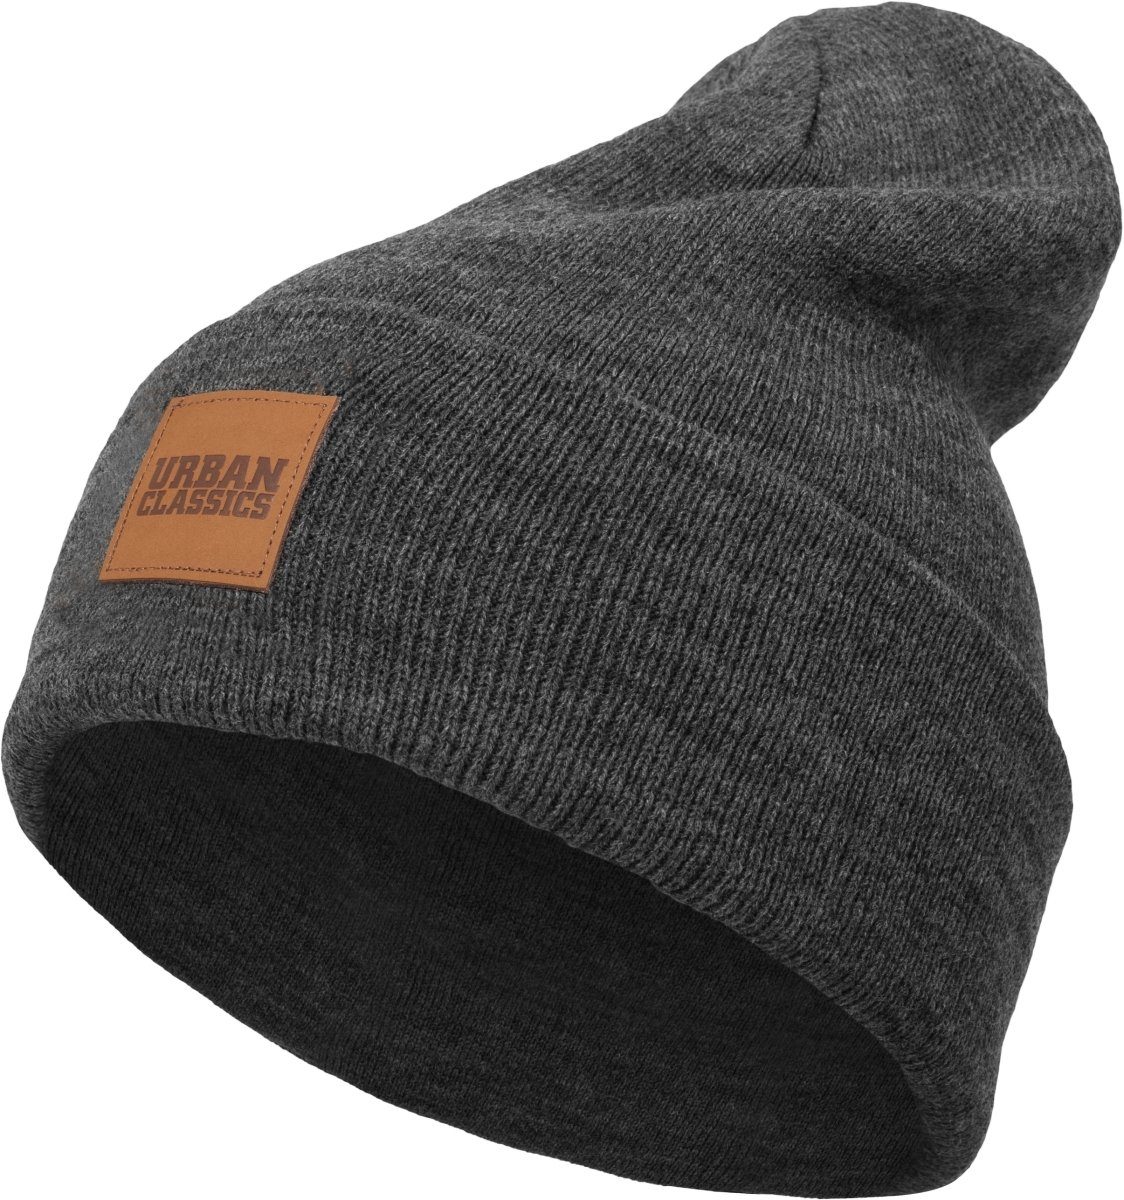 URBAN CLASSICS Beanie Unisex Synthetic Leatherpatch (1-St) Beanie Long charcoal